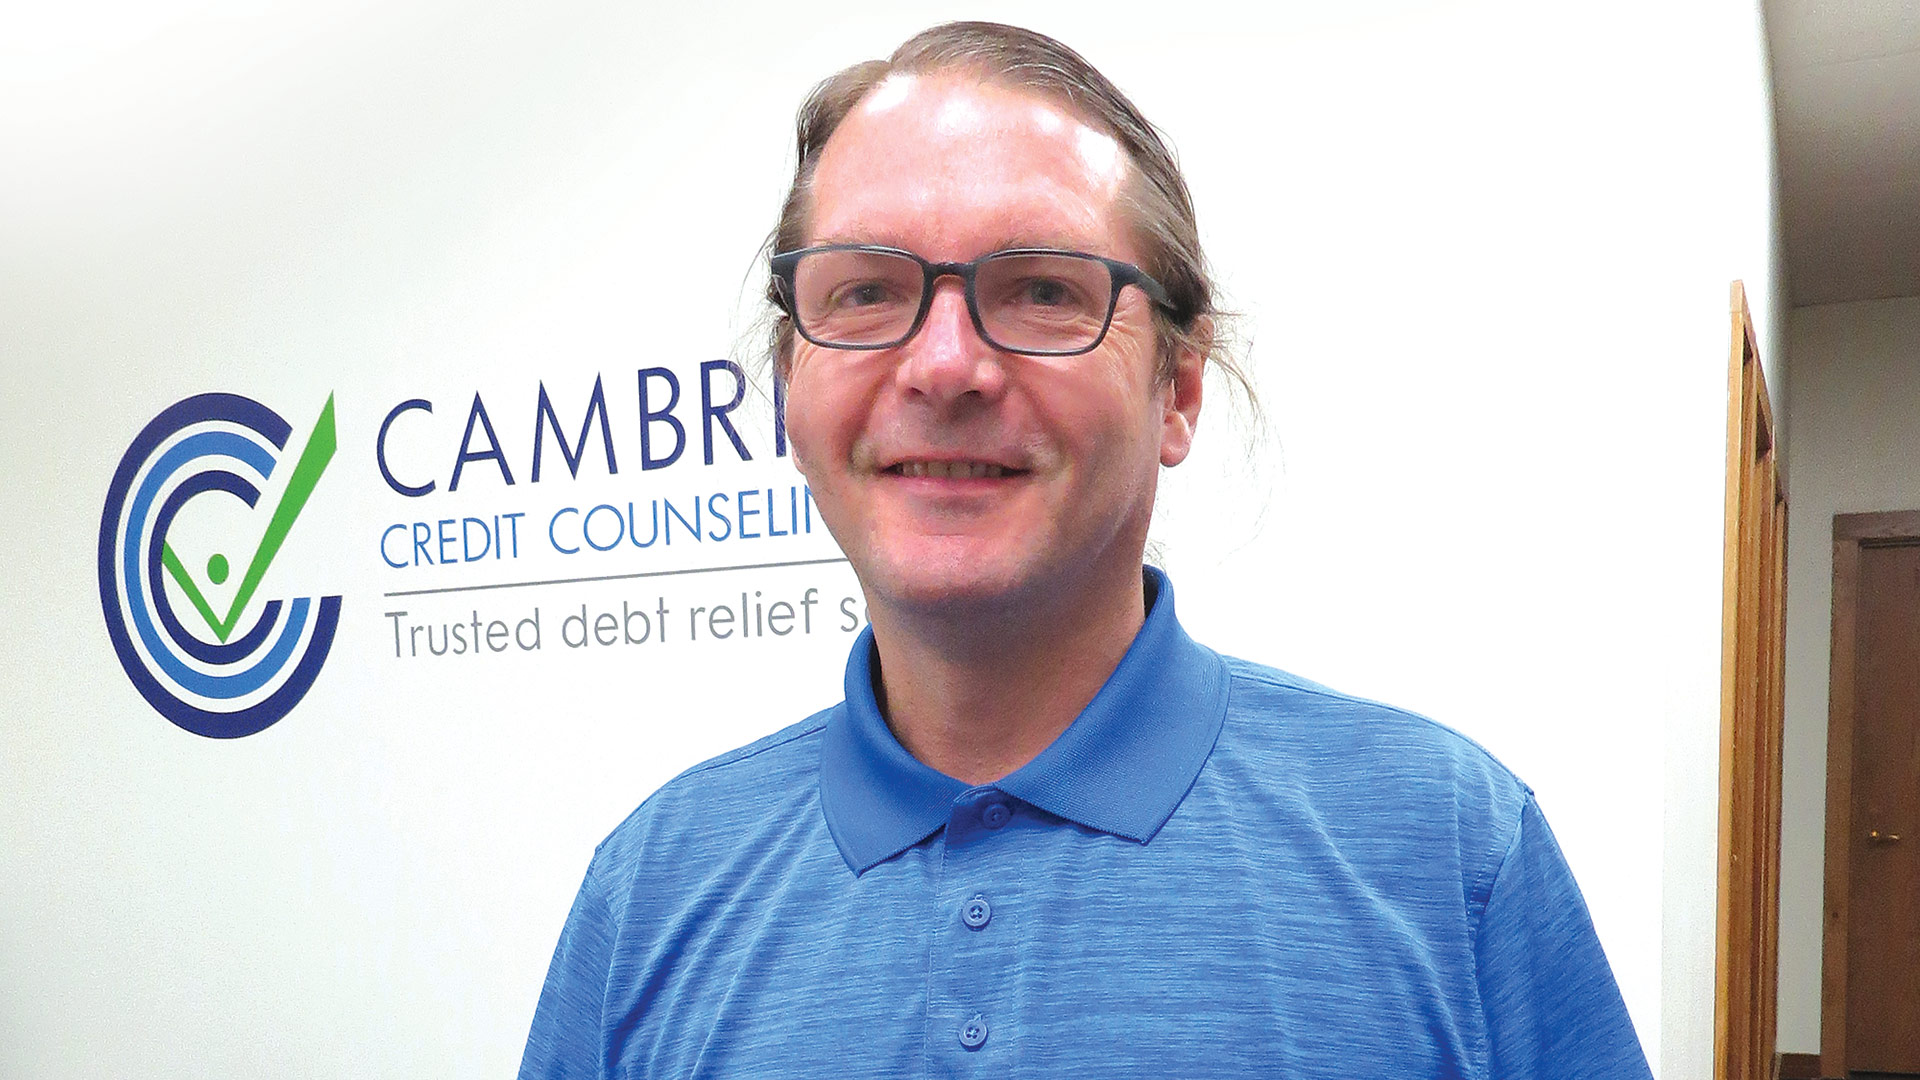 Chris Viale, president and CEO of Cambridge Credit Counseling